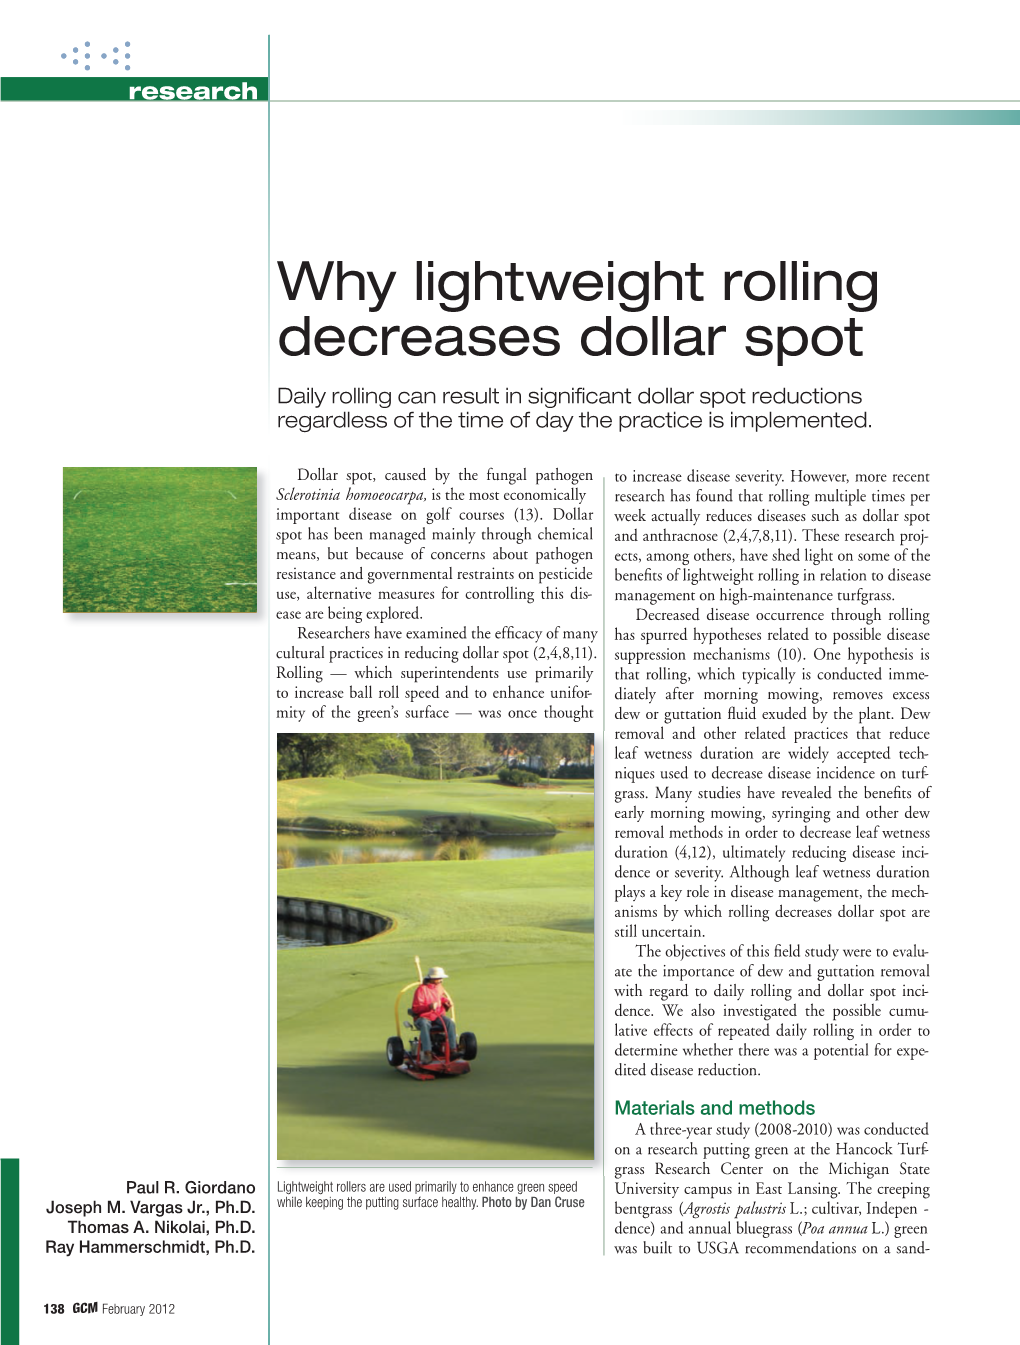 Rolling and Dollar Spot Inci- Dence